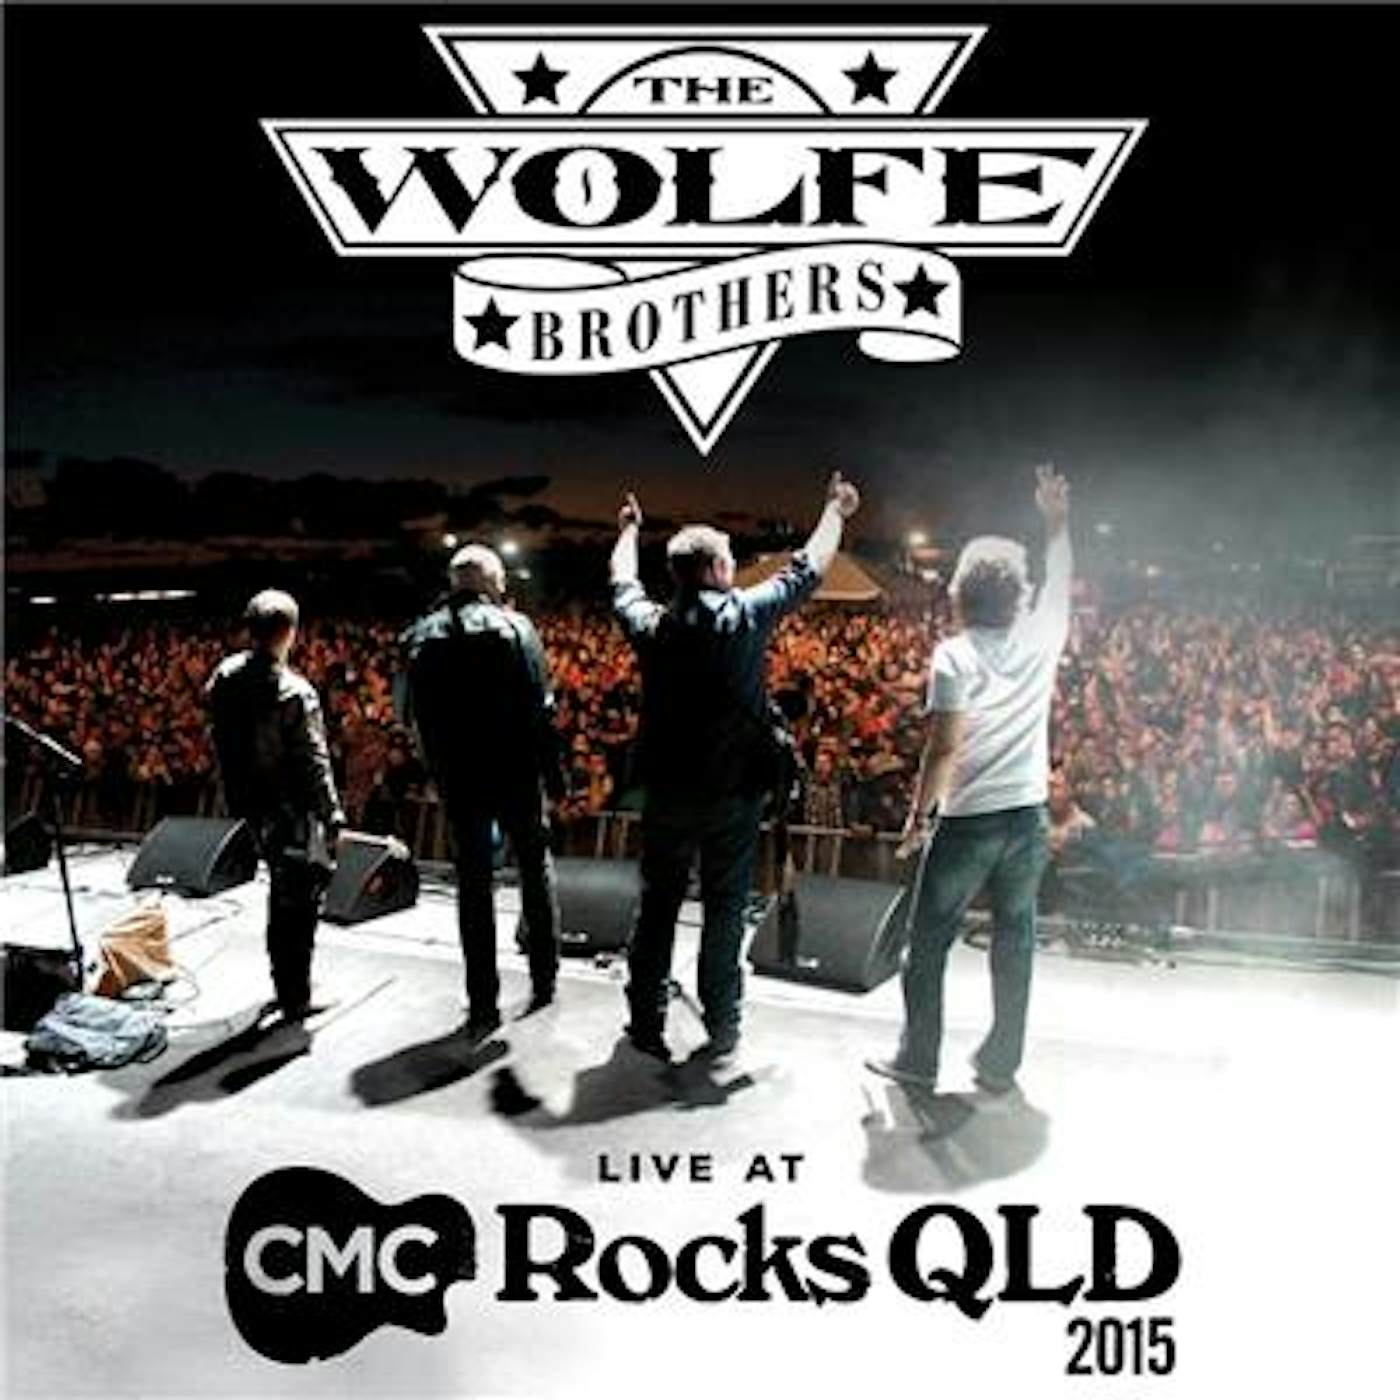 The Wolfe Brothers - Live at CMC CD/DVD